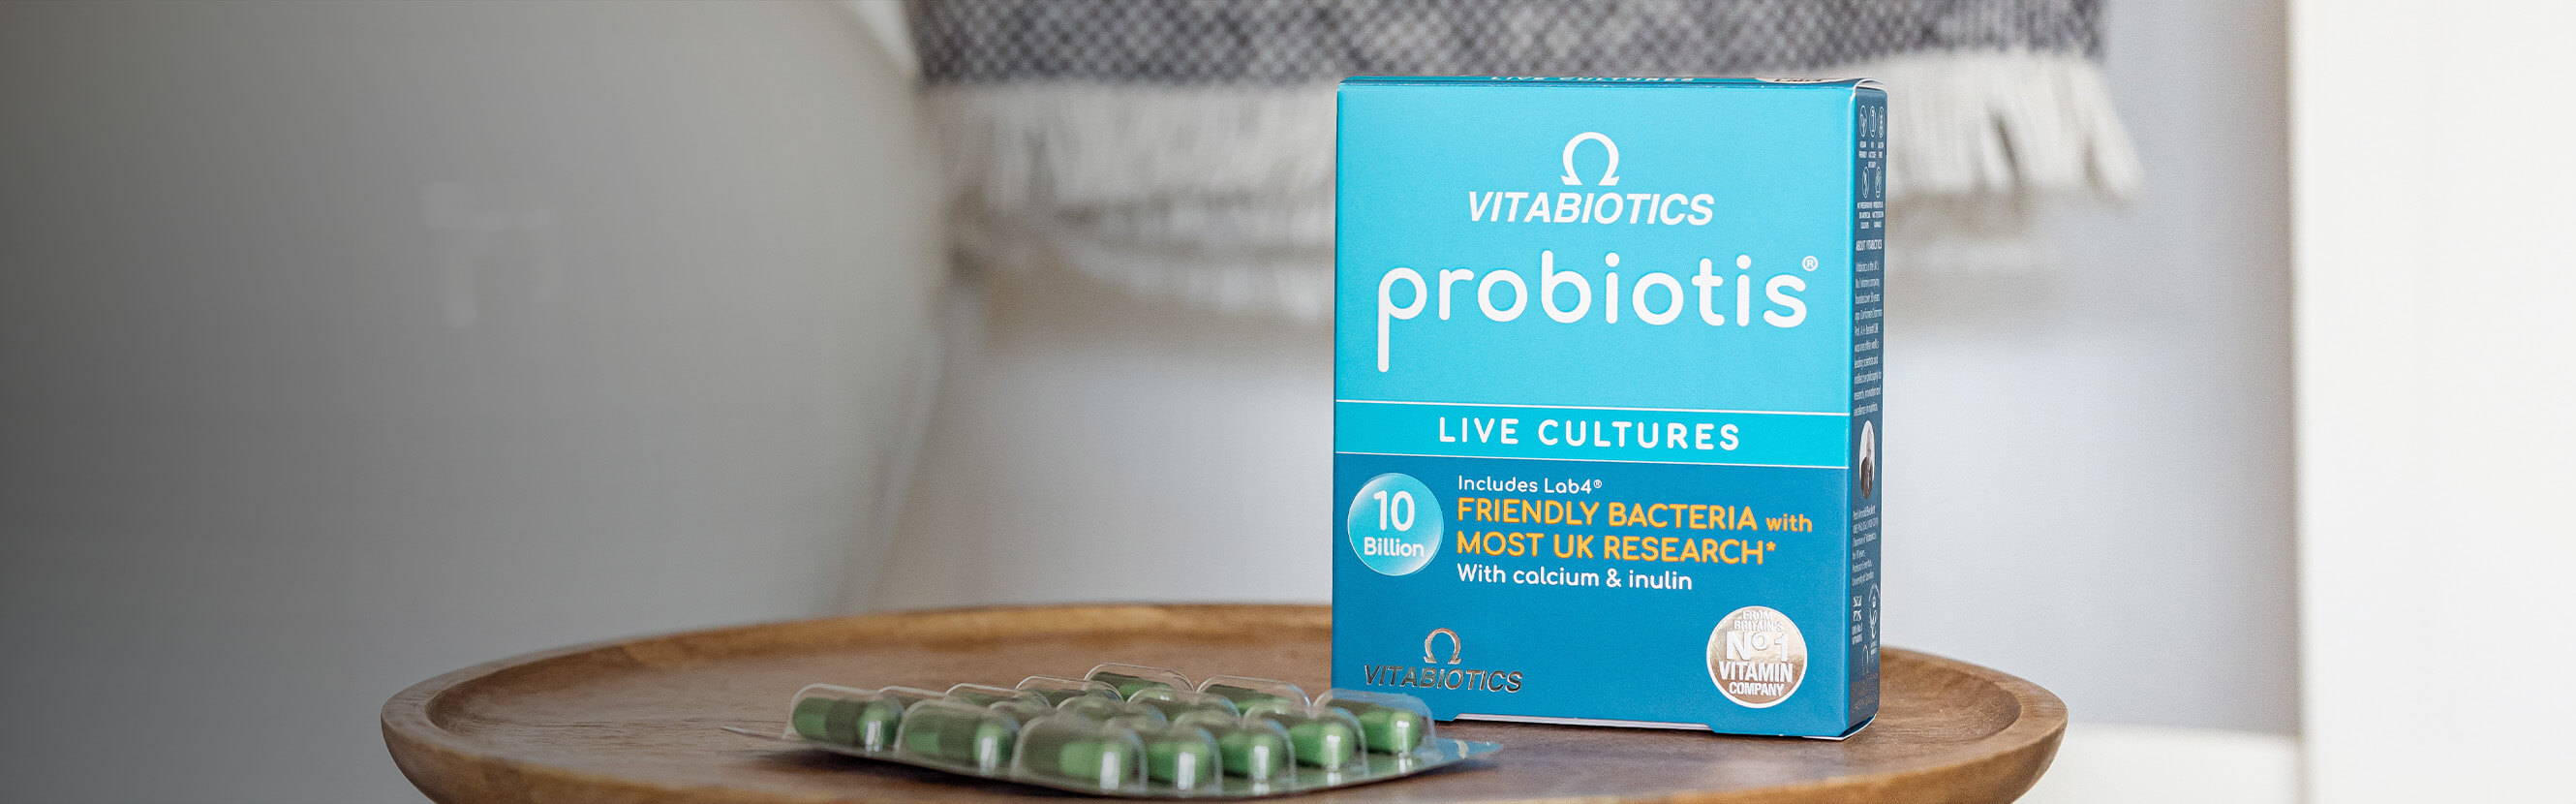  From stress to environmental toxins, your natural gut bacteria is affected by all kinds of things, inside and out. Probiotis Live Cultures is a way to add to your digestive system flora with bacteria including Lab4®, Lactobacillus Acidophilus and Bifidobacterium. 